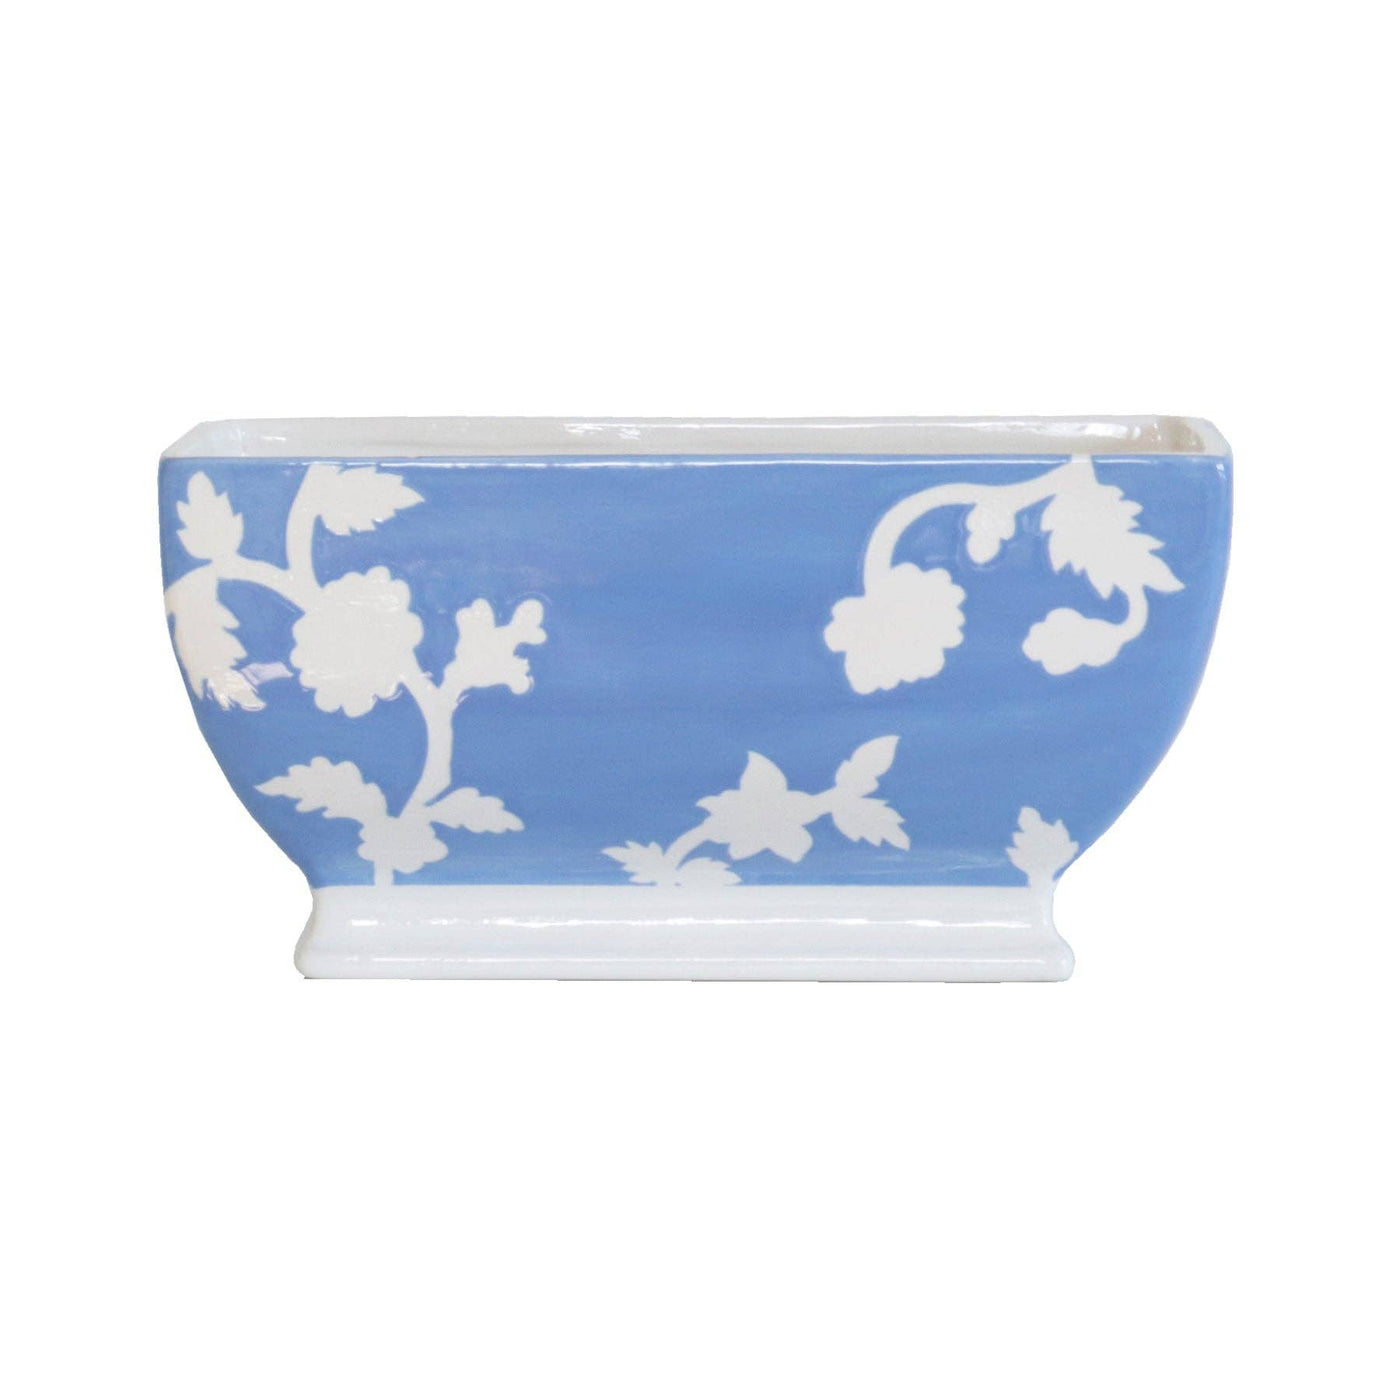 Lo Home by Lauren Haskell Designs - Chinoiserie Dreams Planter